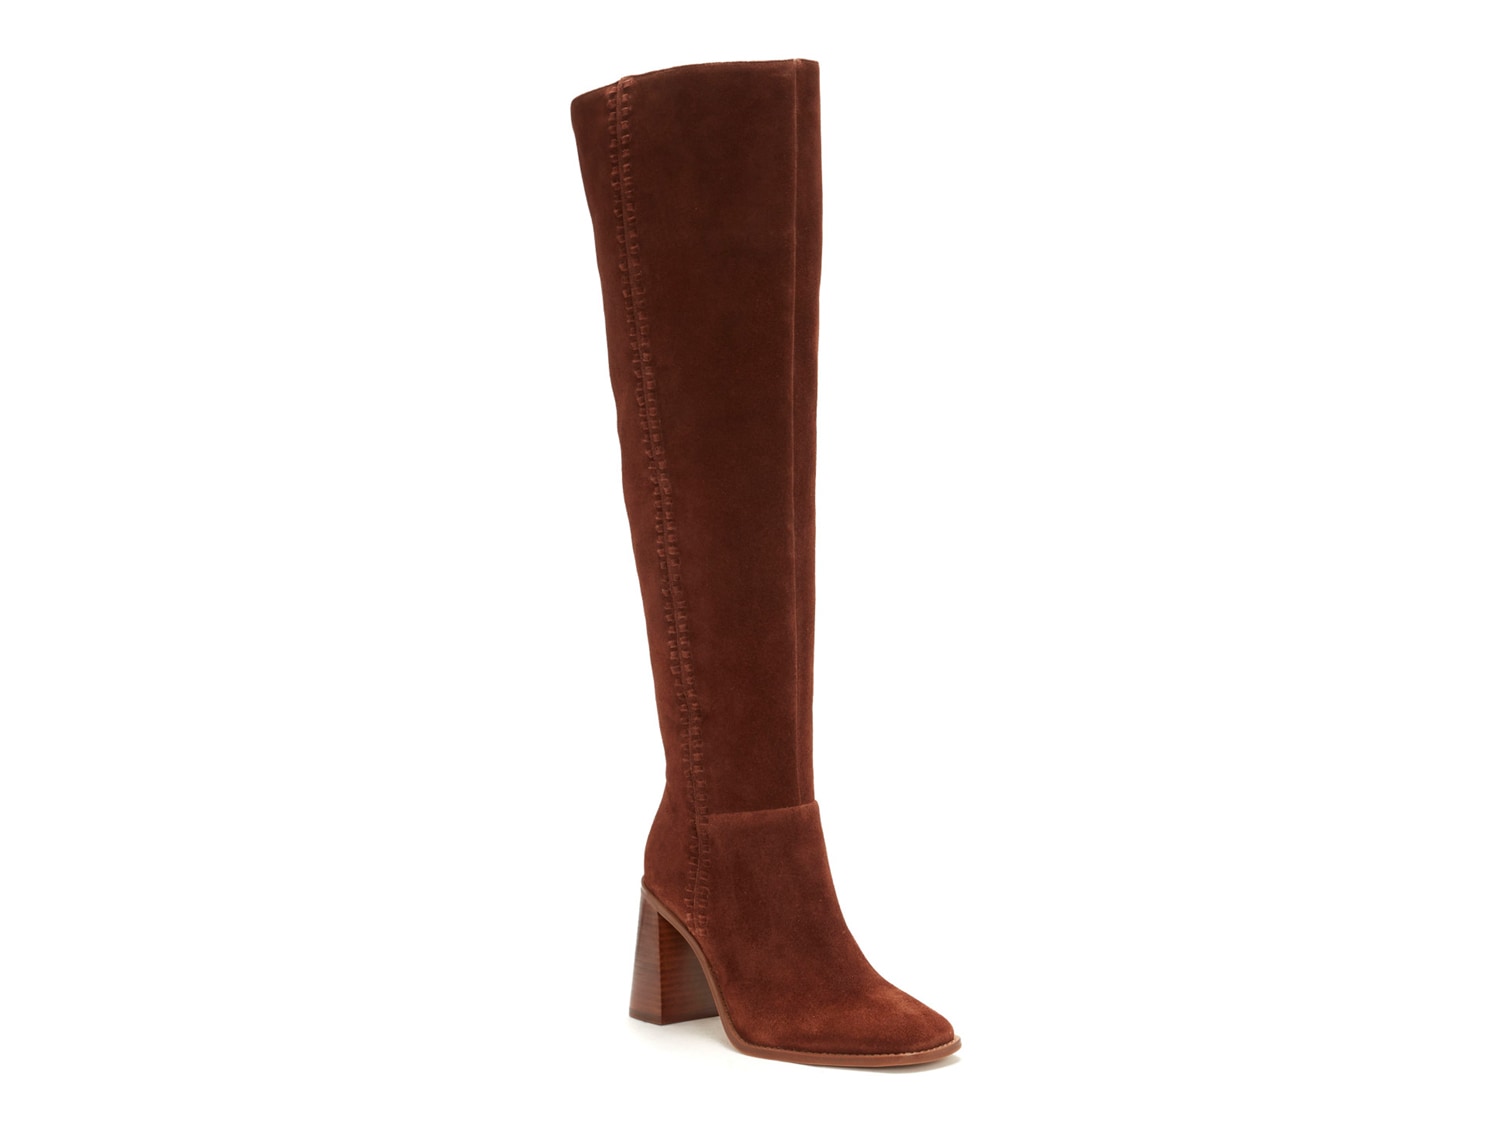 Vince Camuto Englea Over-the-Knee Boot - Free Shipping | DSW